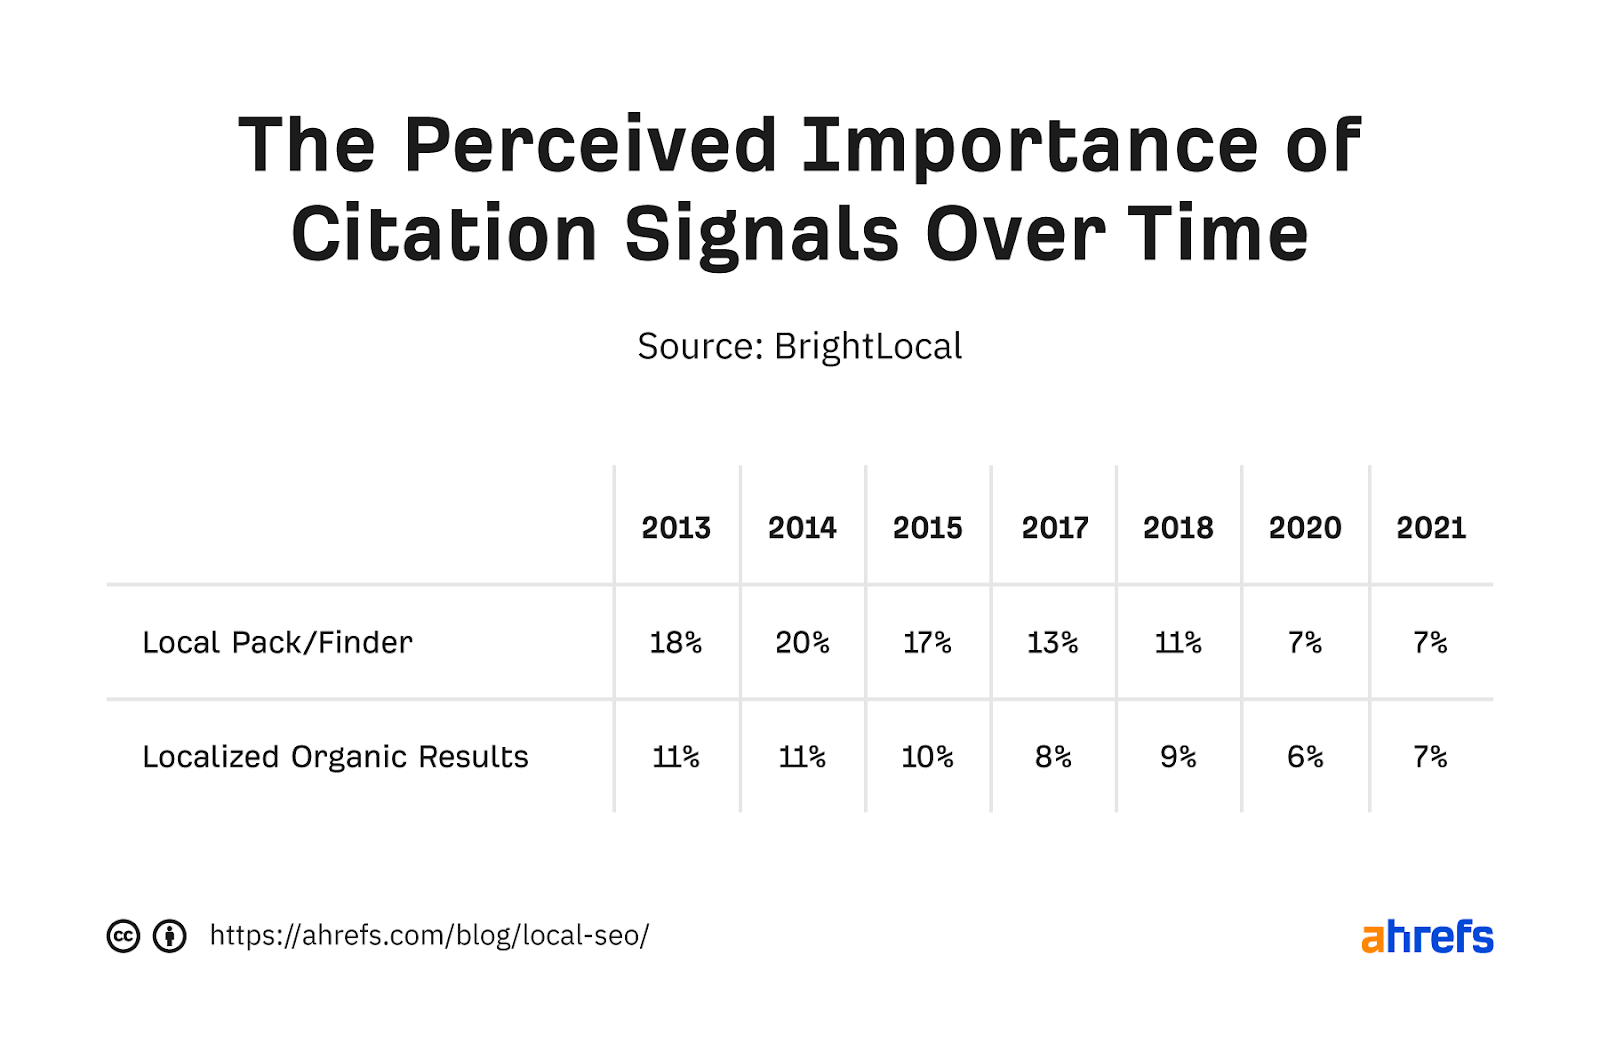 Table showing perceived importance of citation signals over time for map pack and "regular" results, respectively